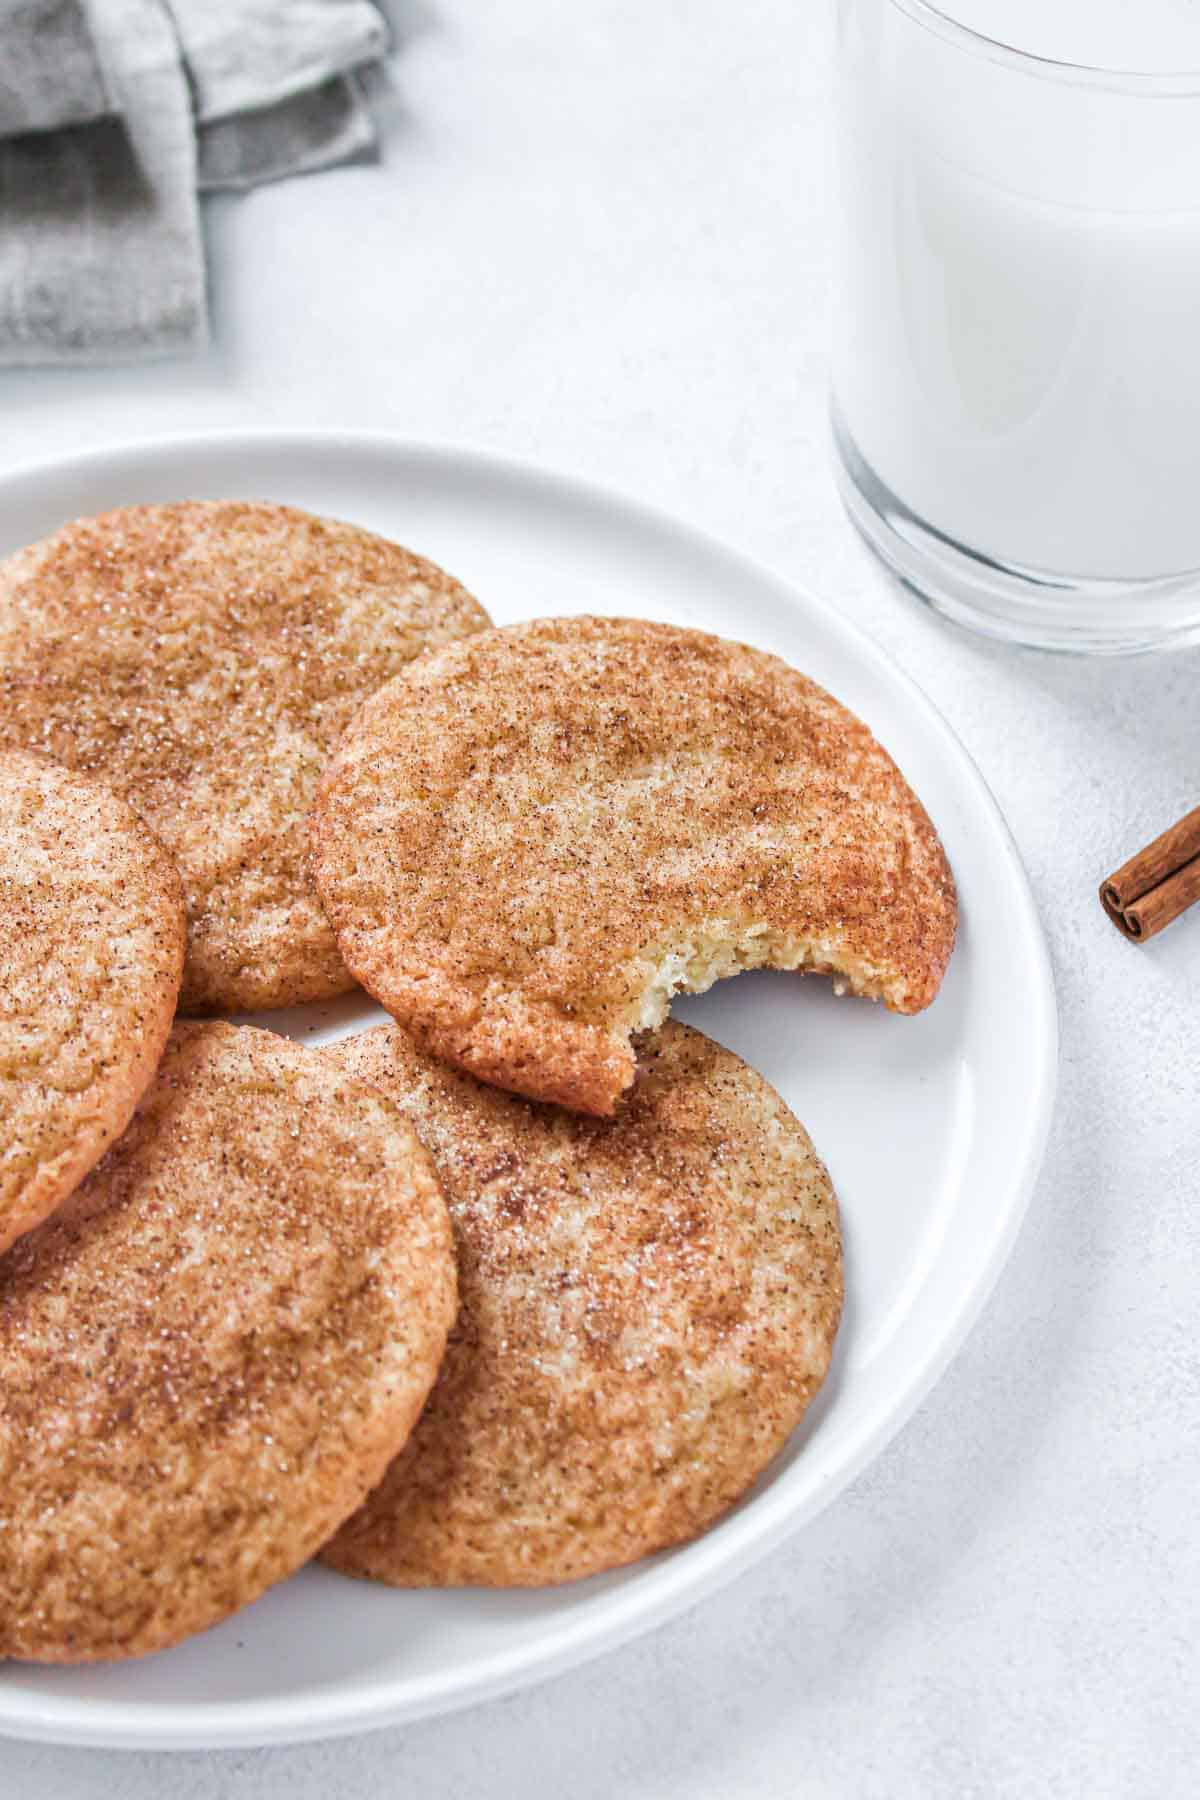 Snickerdoodles on a plate, one cookie with a bite taken out with a glass of milk nearby.